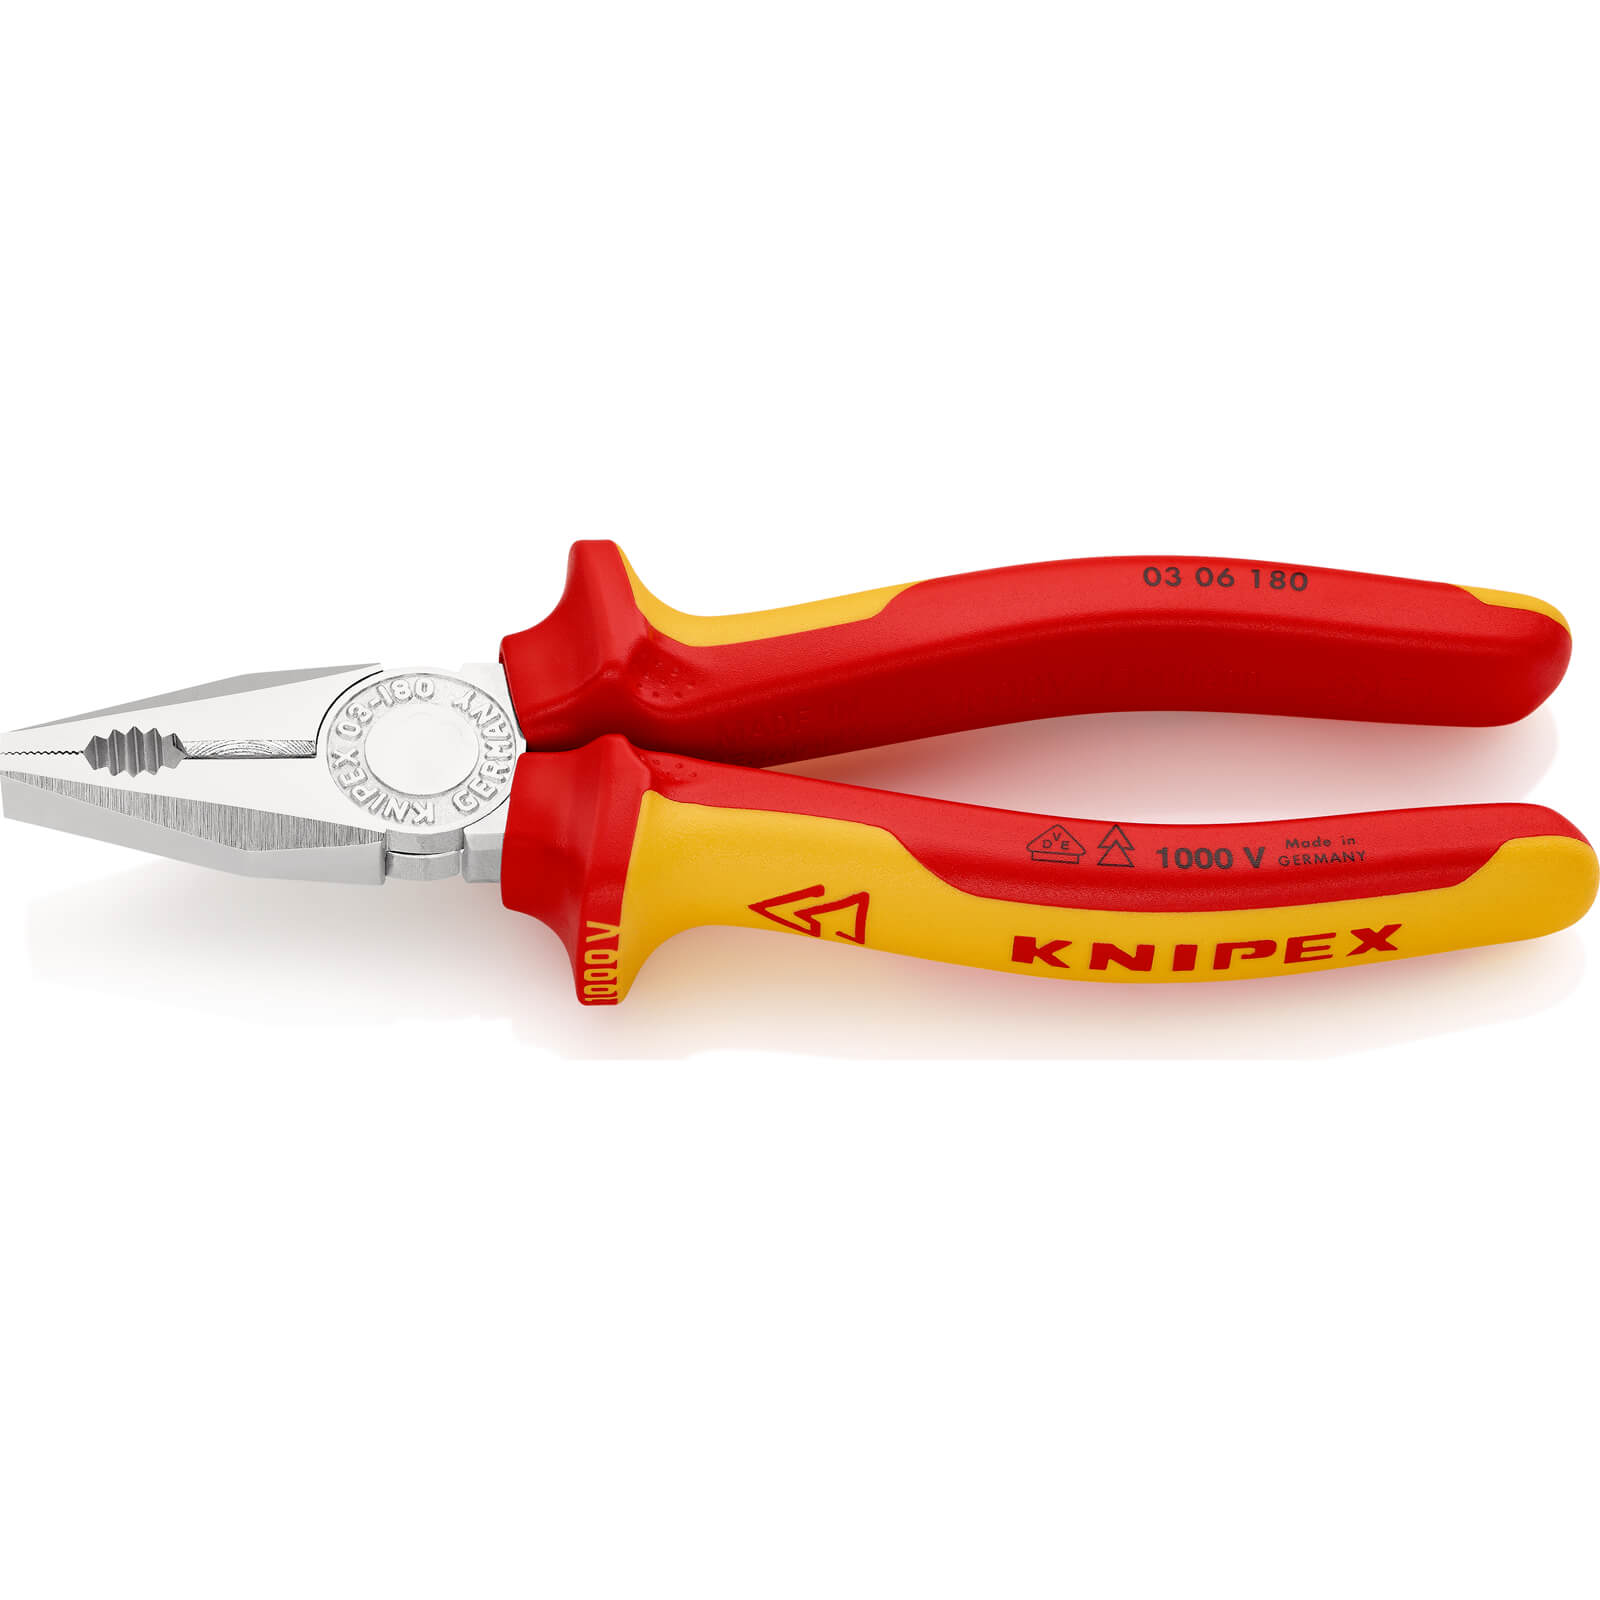 Knipex 03 06 VDE Insulated Combination Pliers 180mm